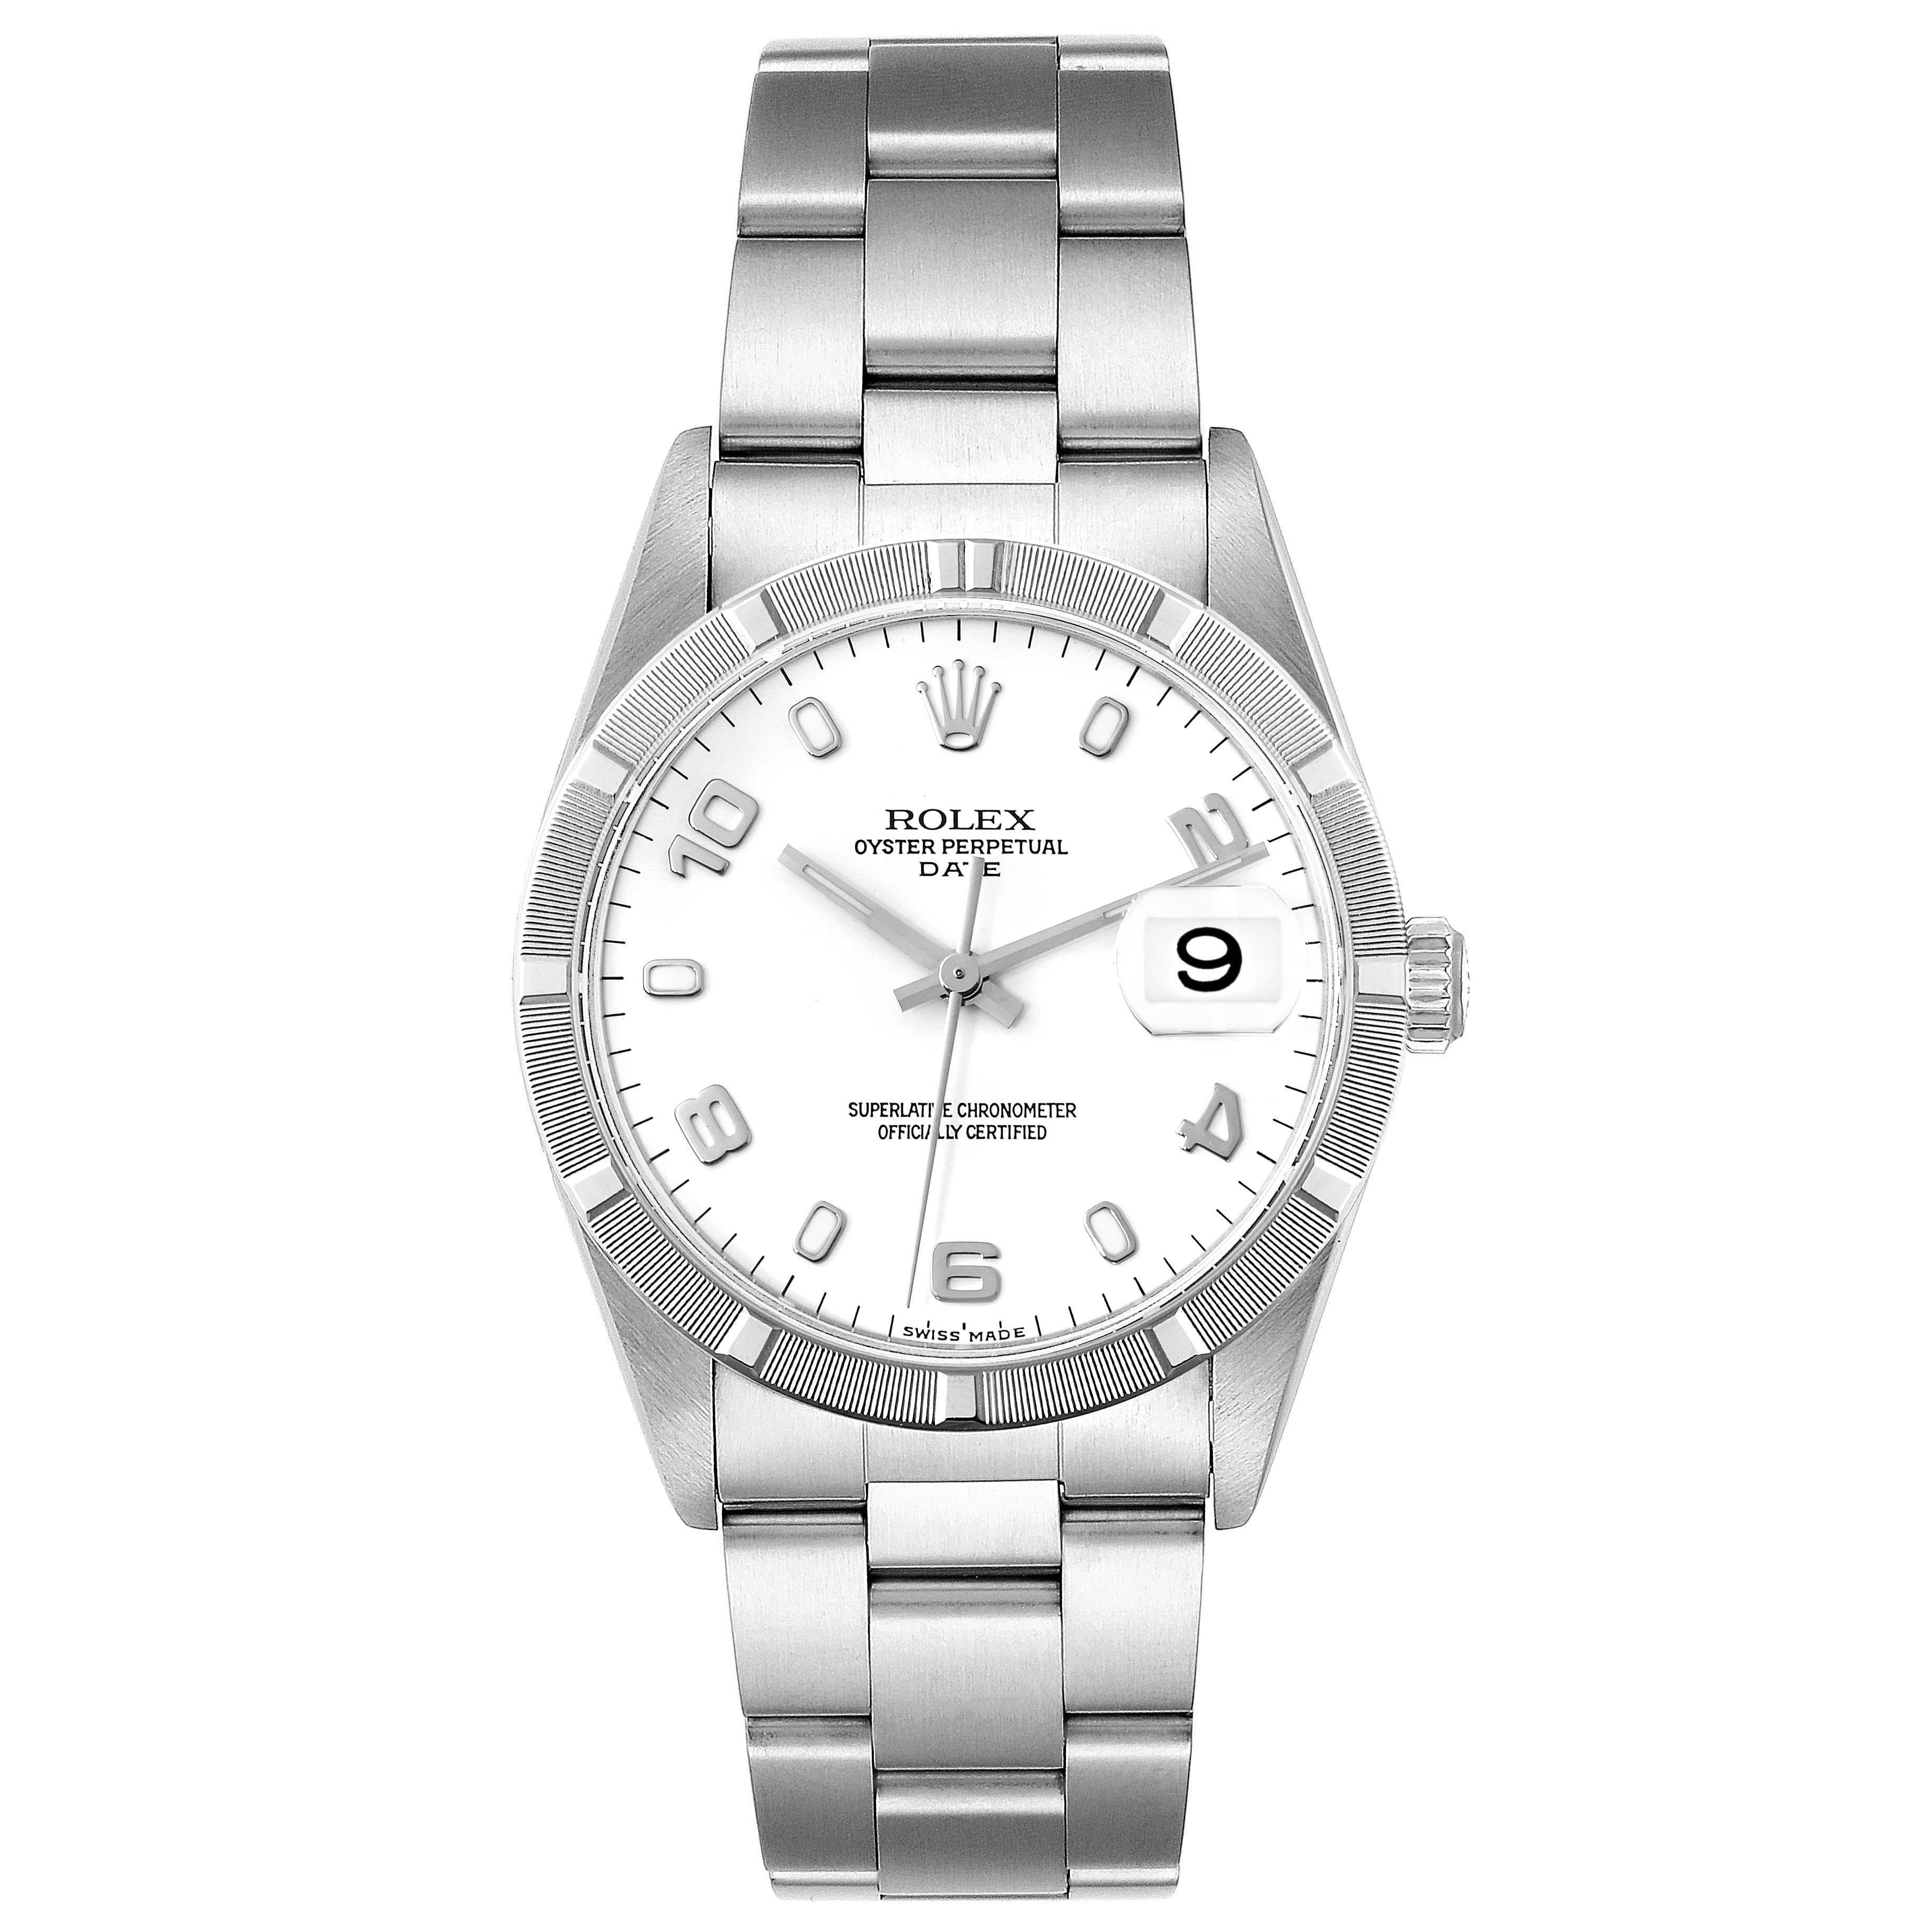 Rolex Date White Dial Engine Turned Bezel Steel Mens Watch 15210. Officially certified chronometer automatic self-winding movement. Stainless steel oyster case 34.0 mm in diameter. Rolex logo on the crown. Stainless steel engine turned bezel.